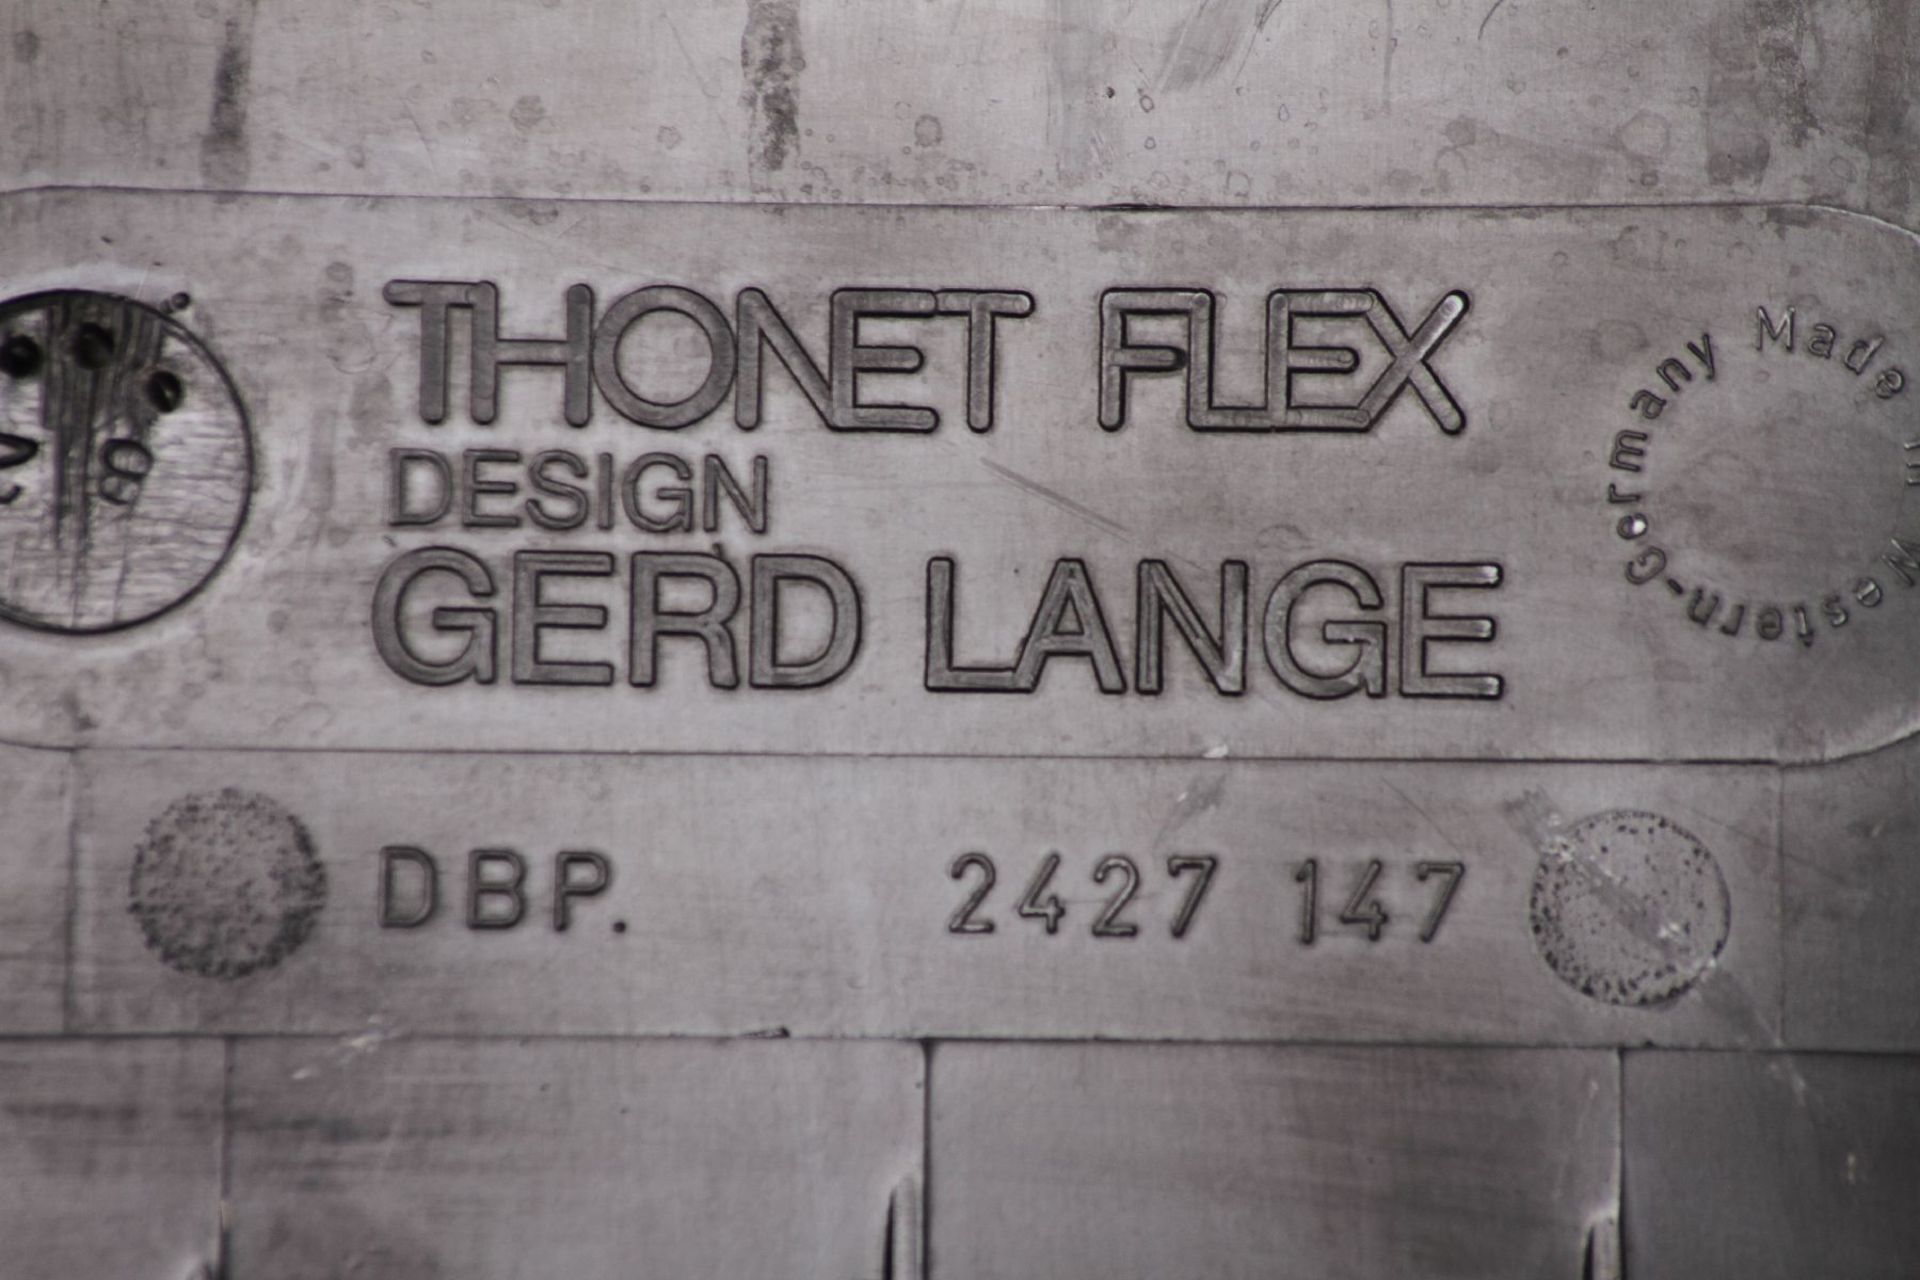 Stuhl, 'Thonet', made in Western Germany, Modell: Flex - Image 2 of 2